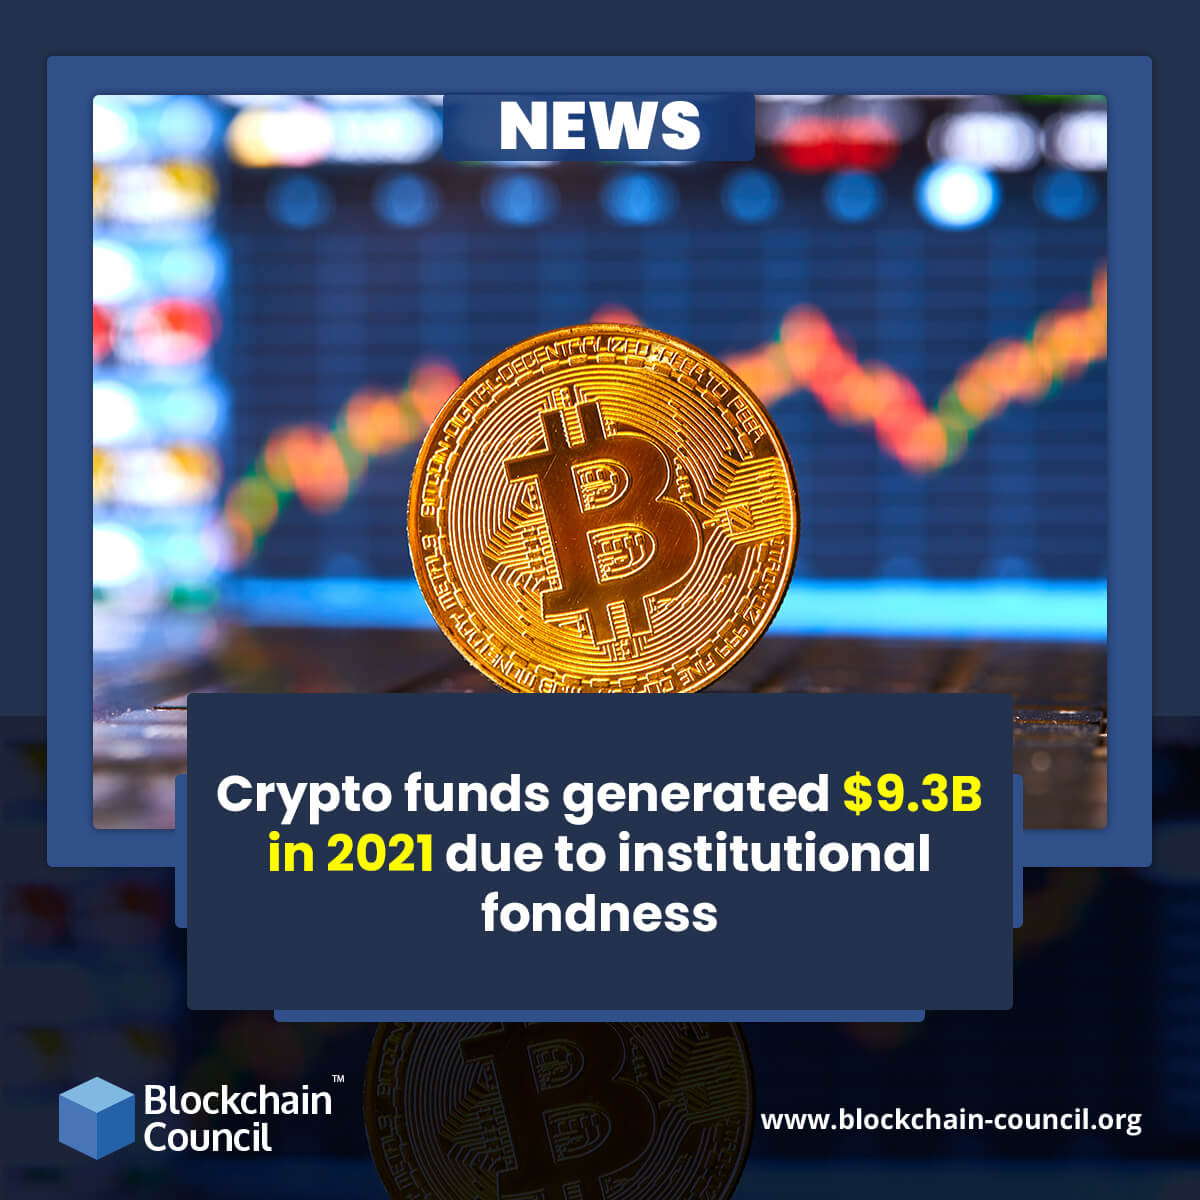 Crypto funds generated $9.3B in 2021 due to institutional fondness